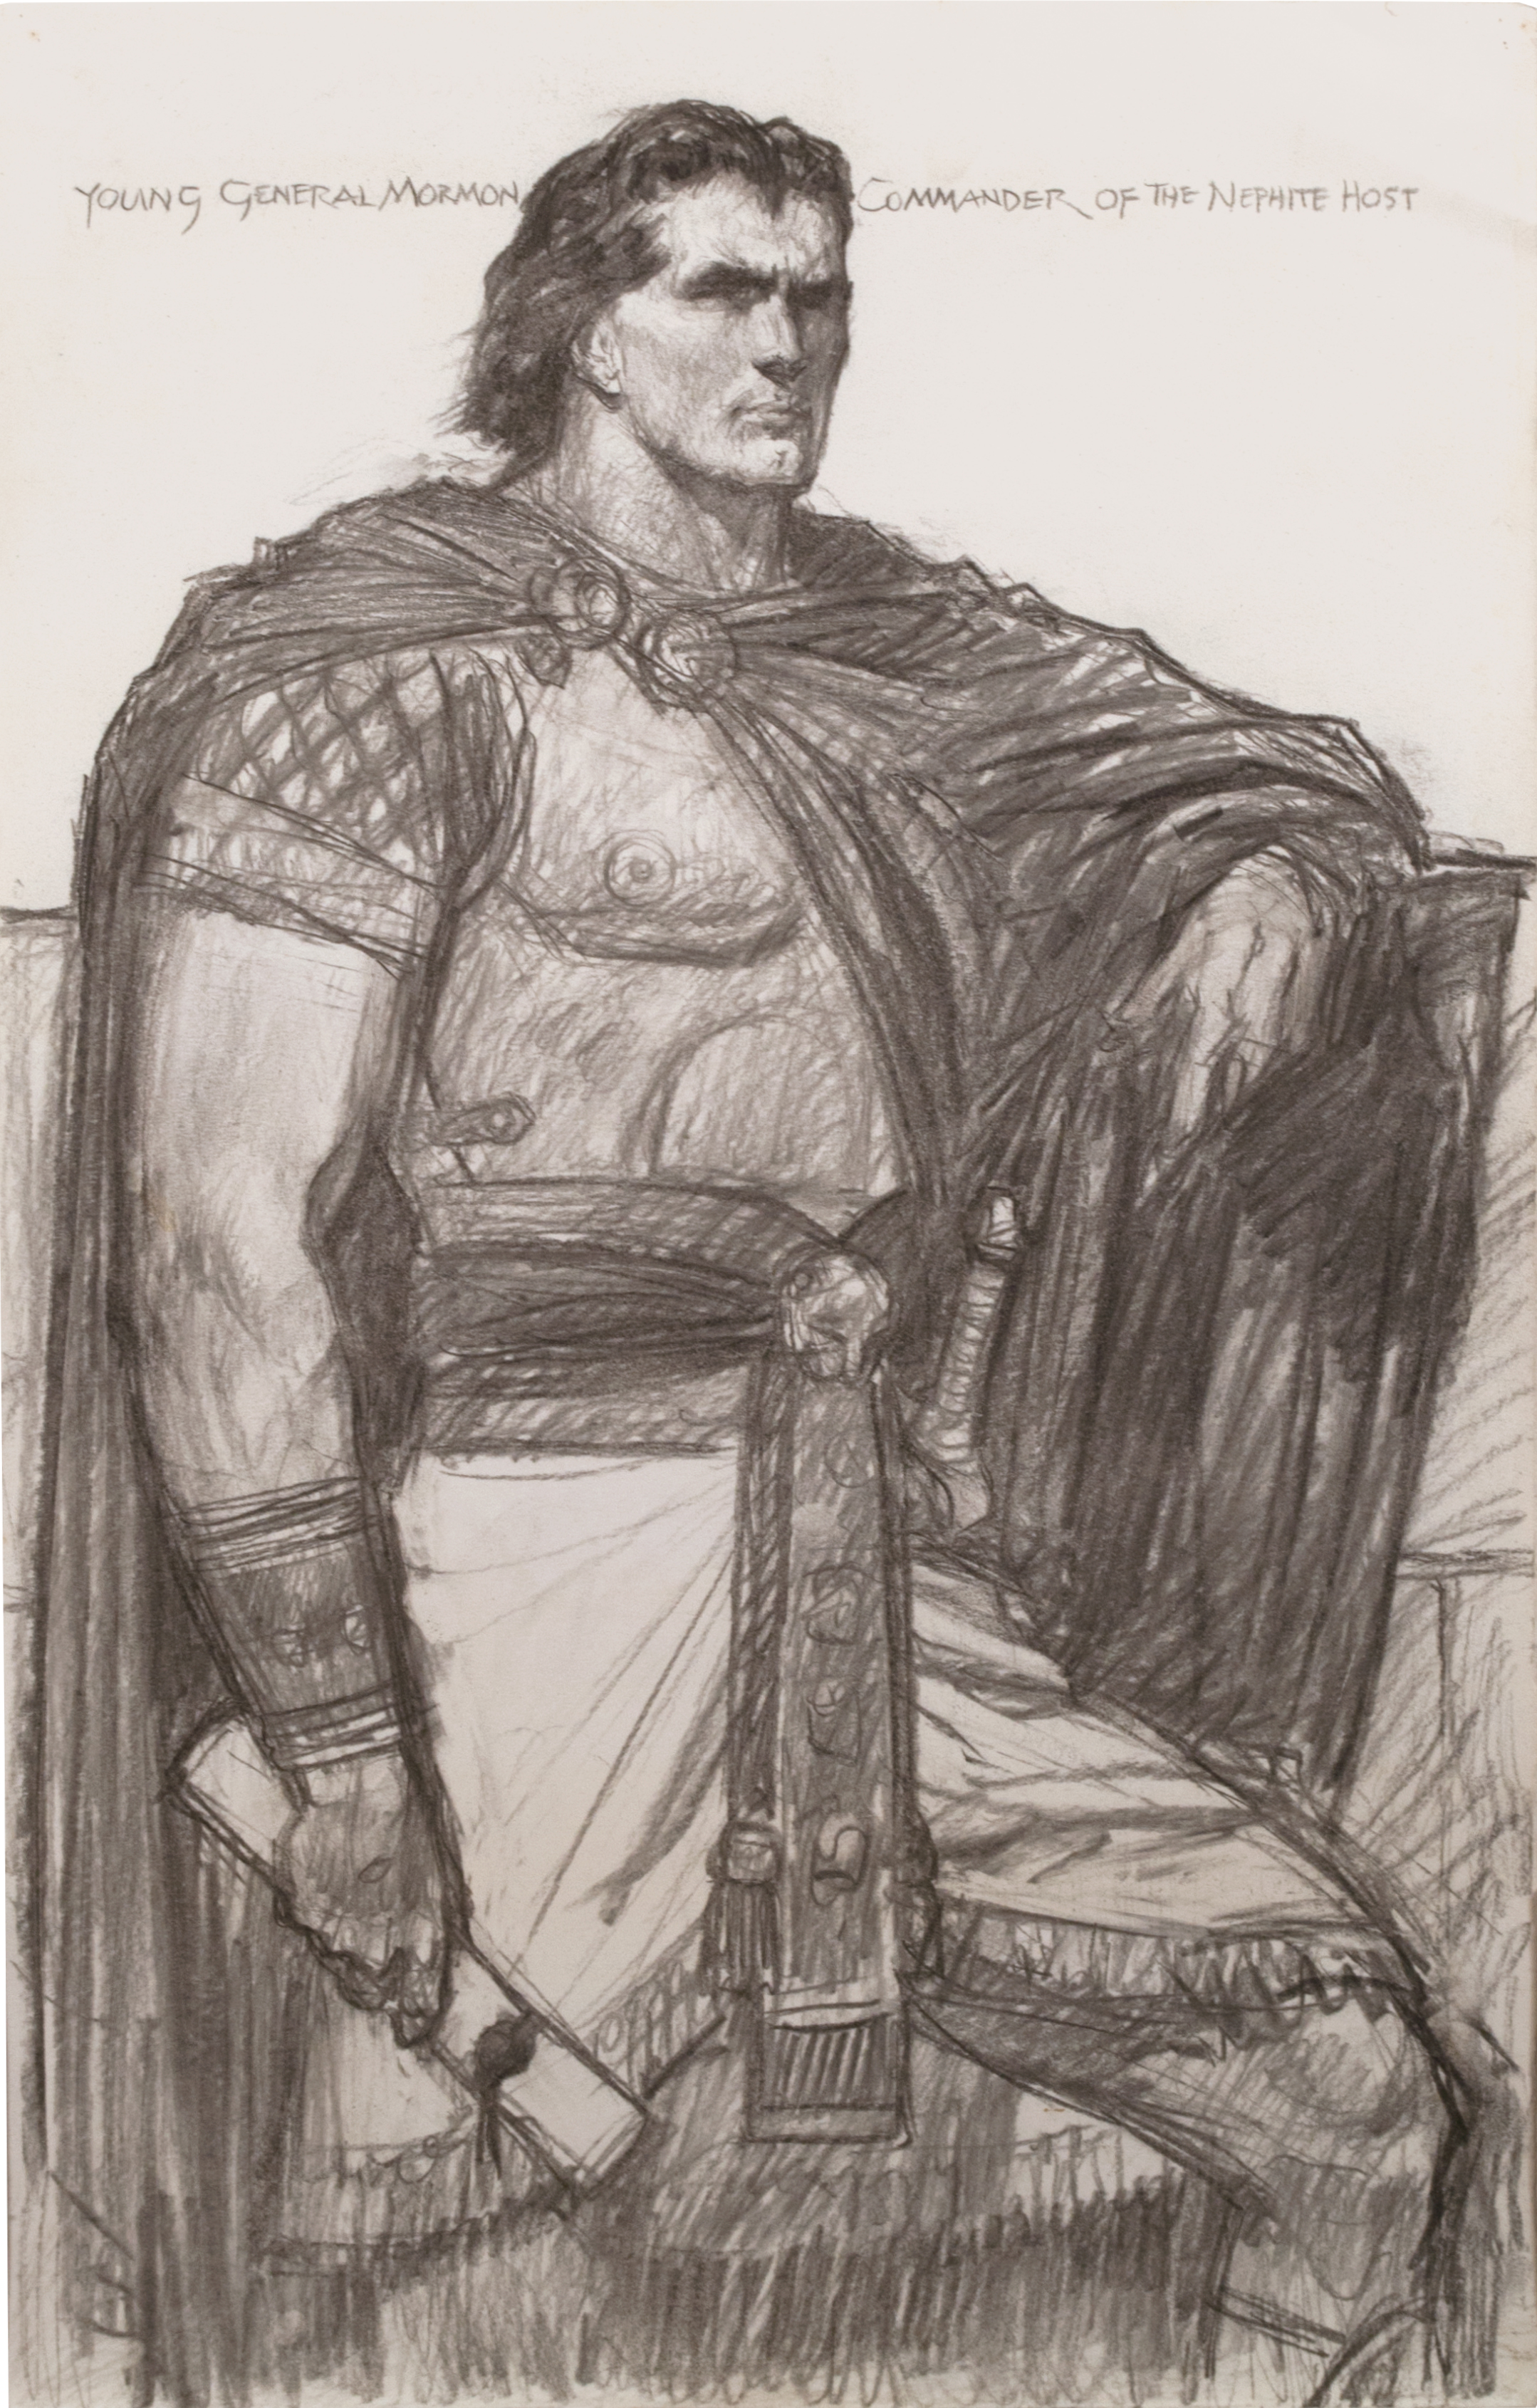 Sketch of “Young General Mormon, Commander of the Nephite Host”